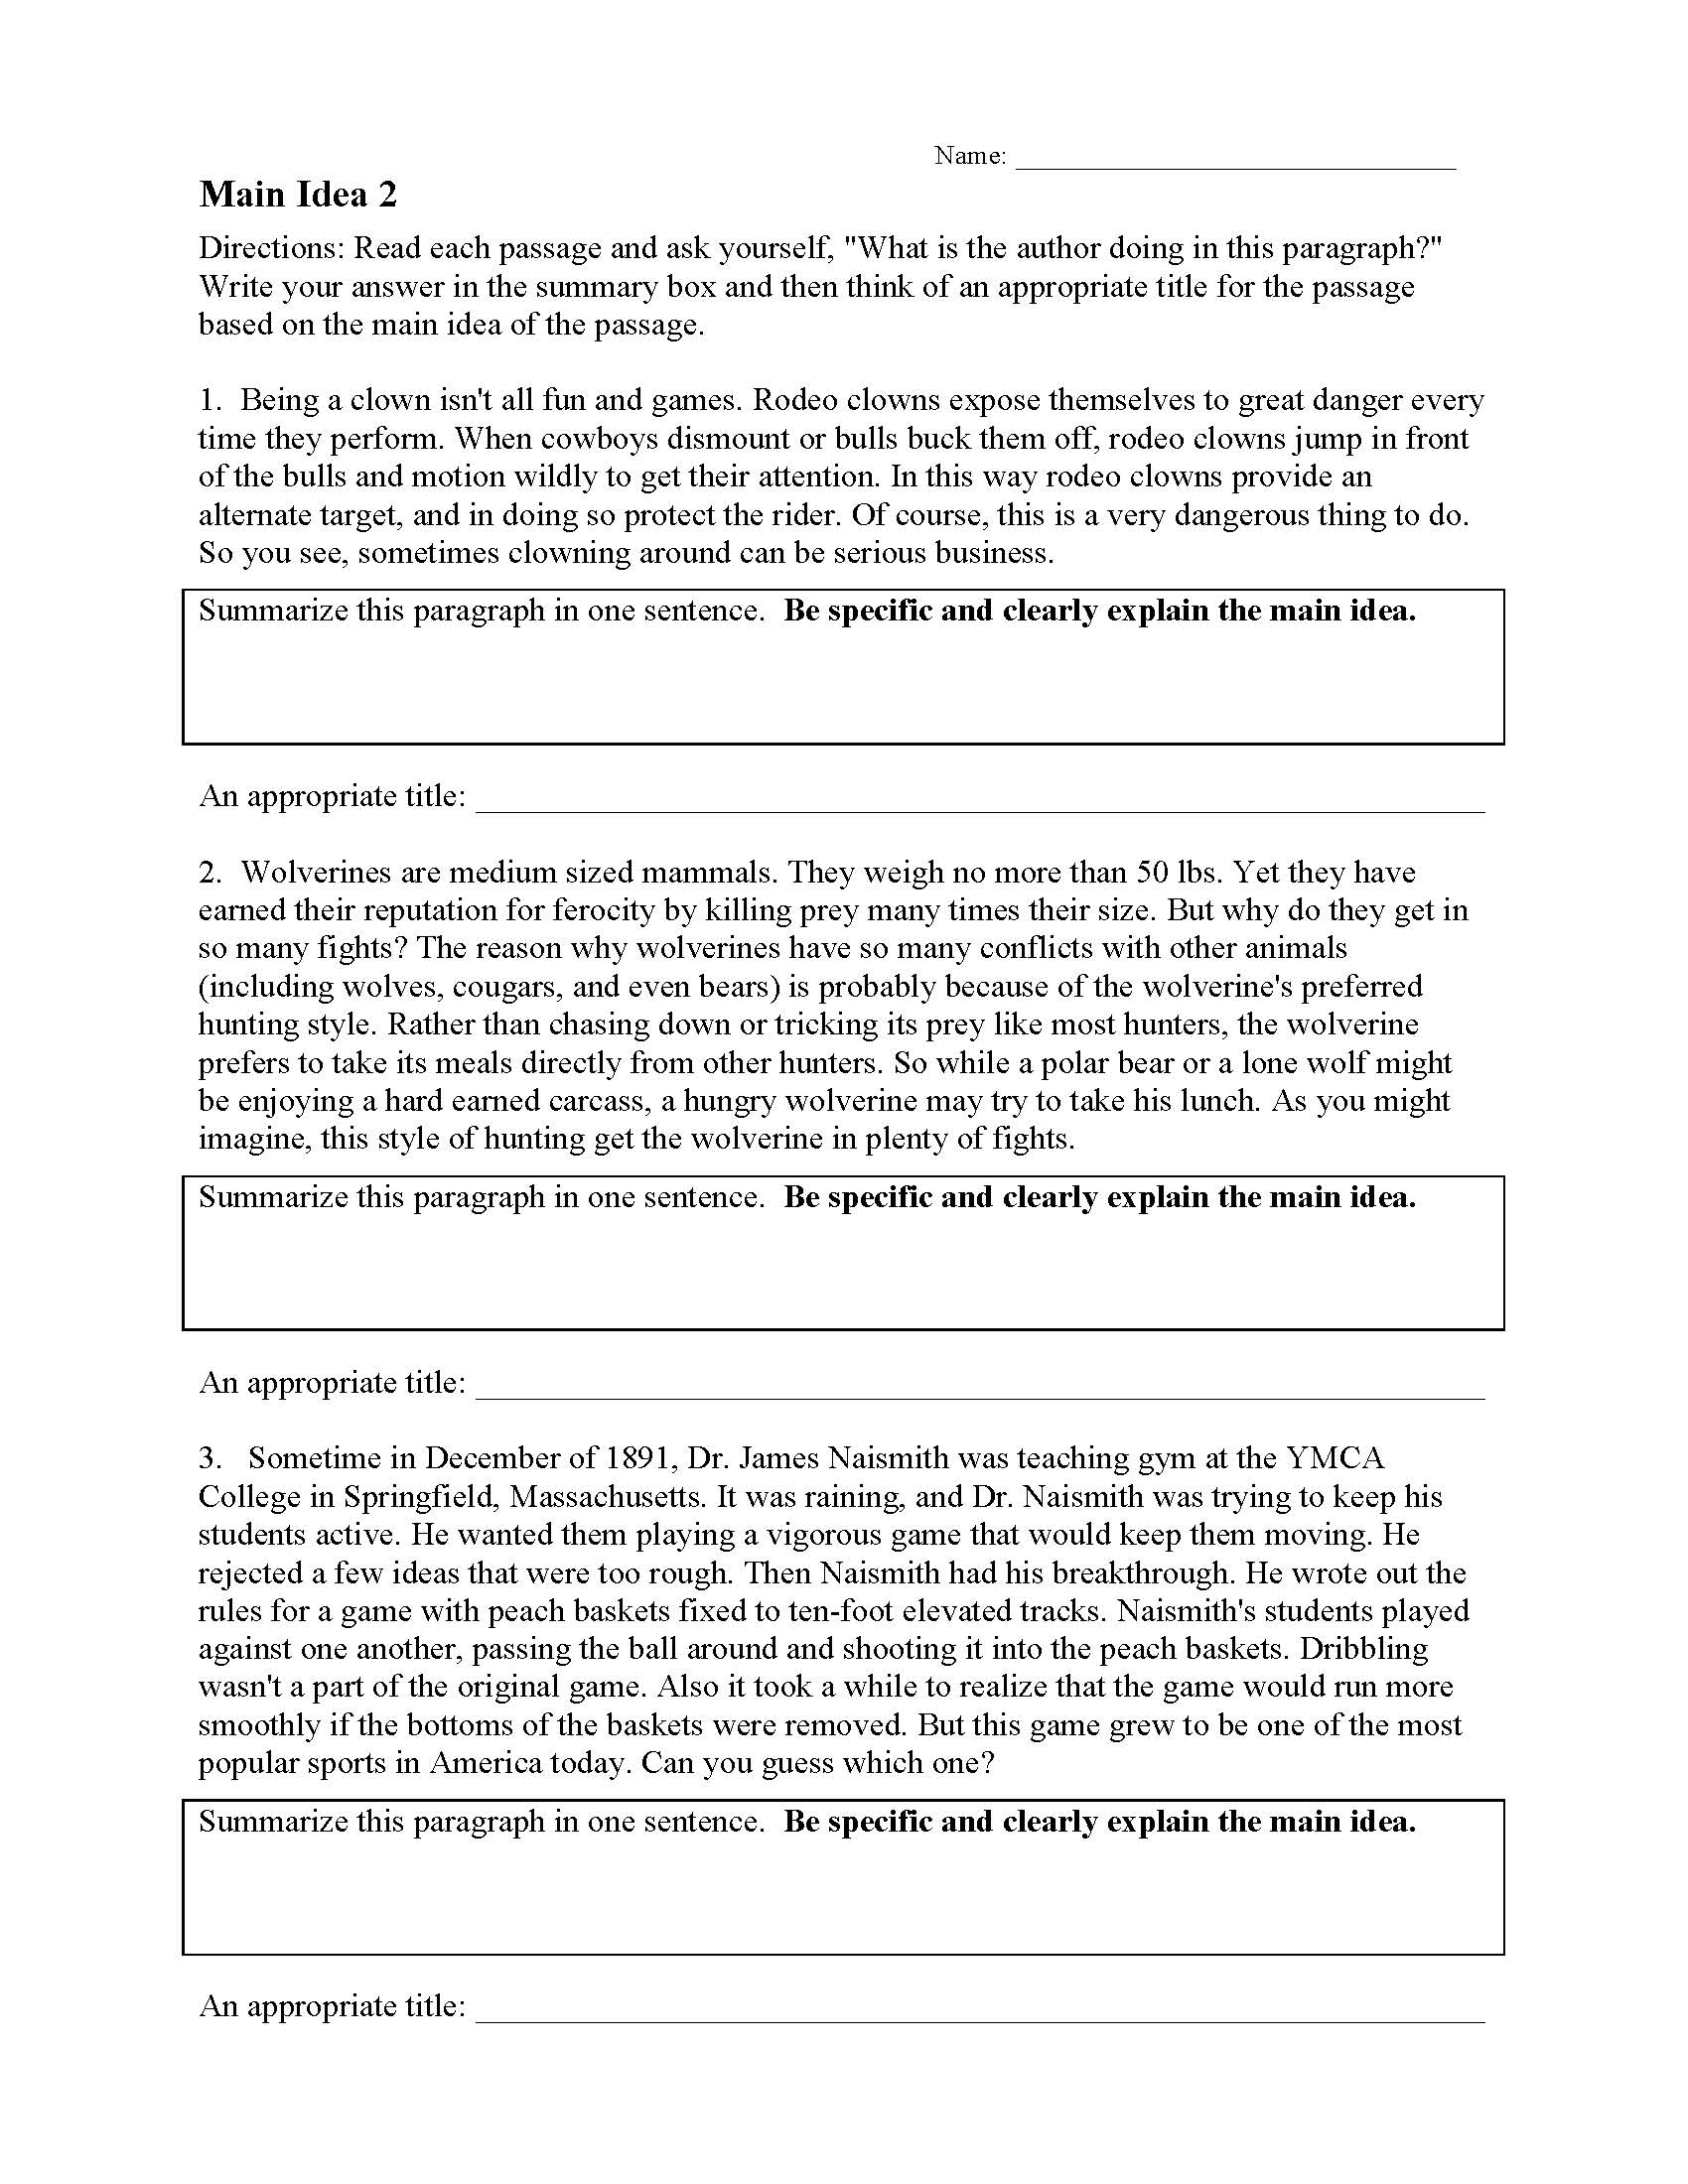 This is a preview image of Main Idea Worksheet 2. Click on it to enlarge it or view the source file.